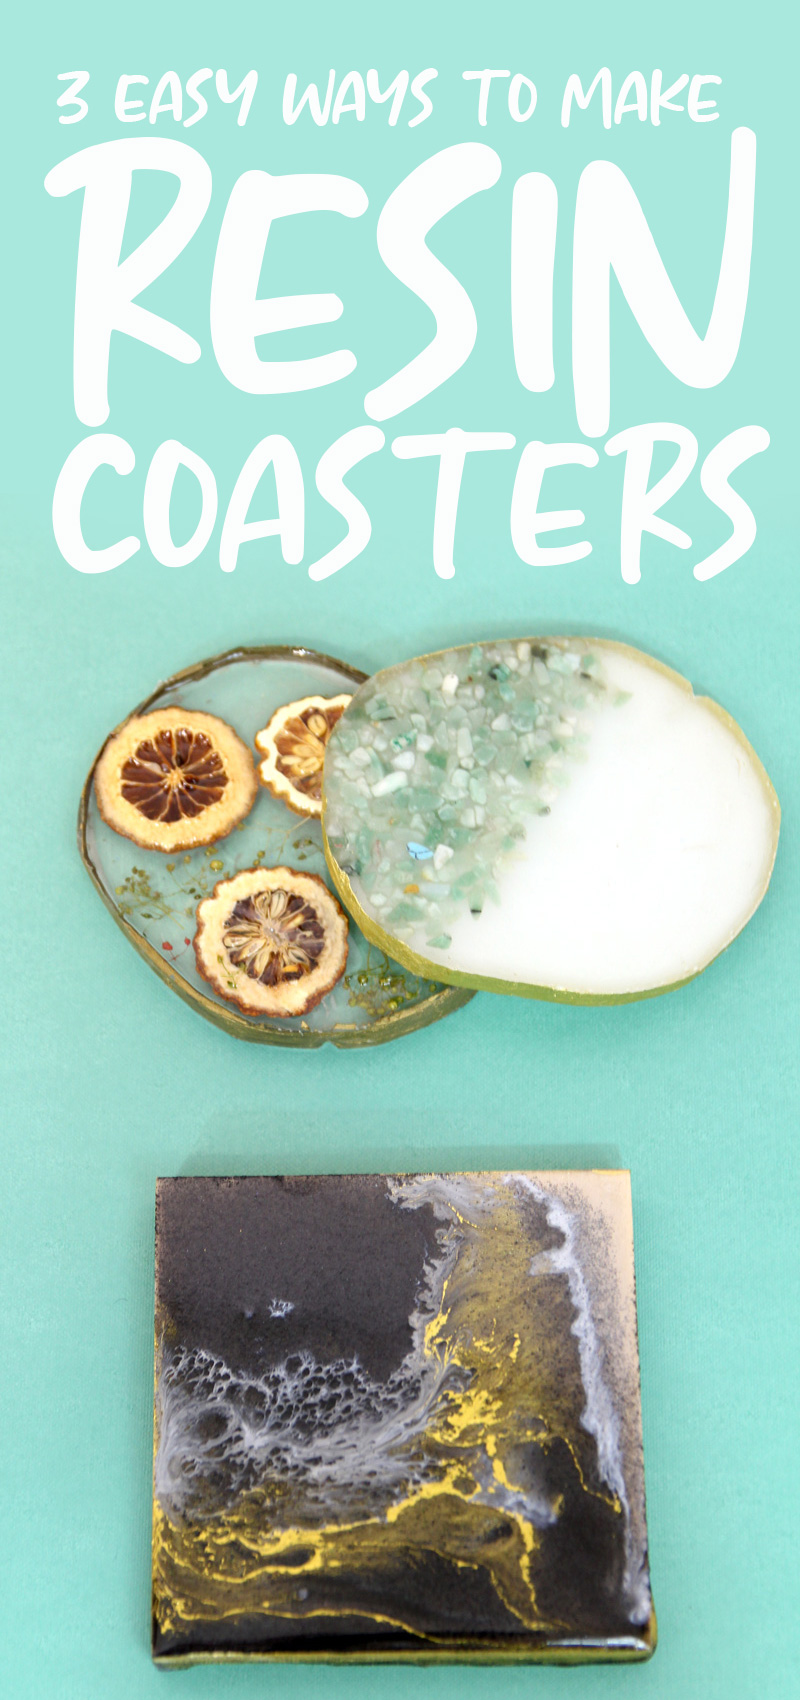 https://www.momsandcrafters.com/wp-content/uploads/2022/10/how-to-make-diy-resin-coasters-hero-1.jpg